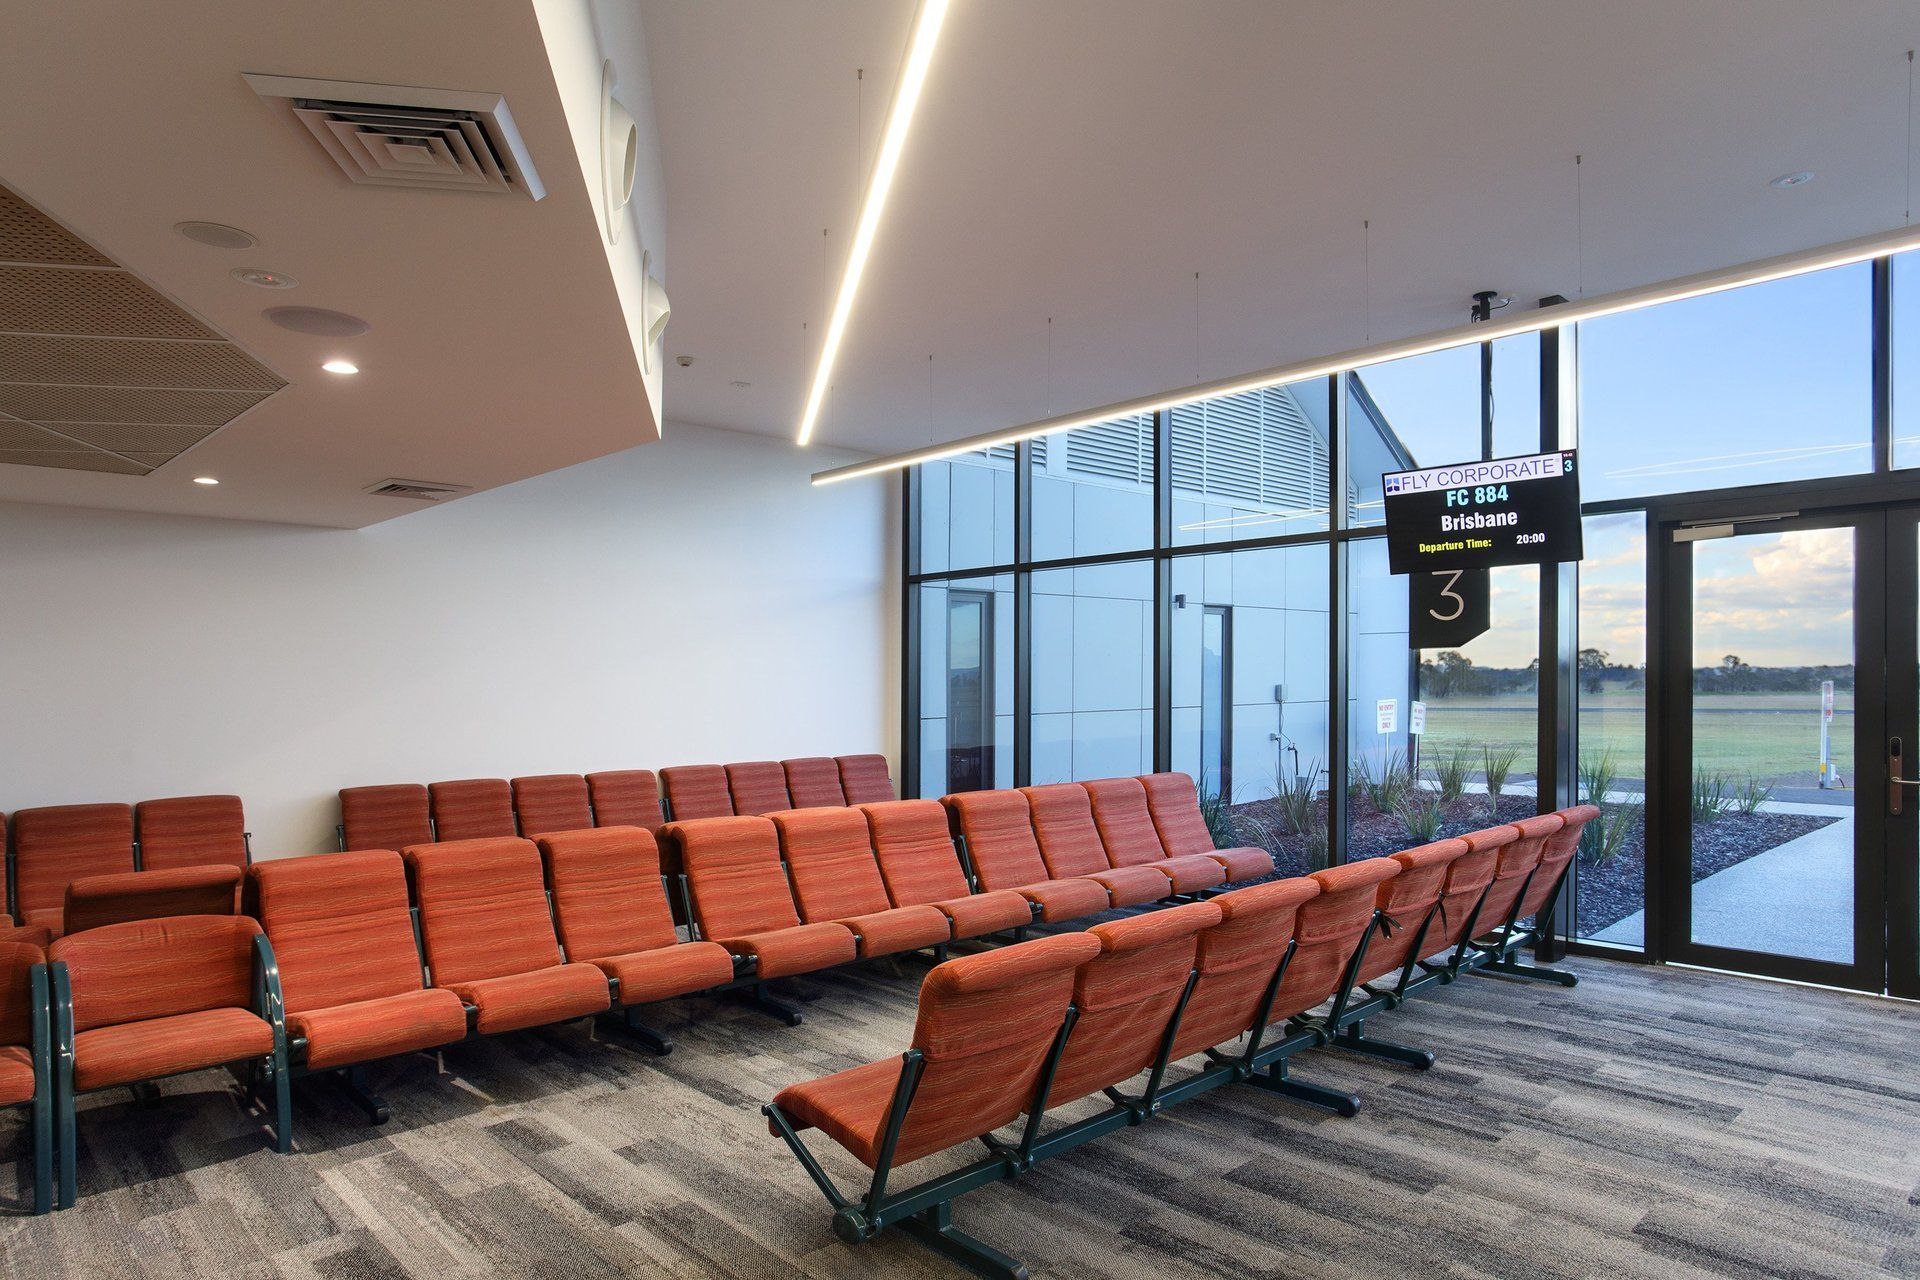 departures area of armidale airport with rows of orange chairs and a large window .